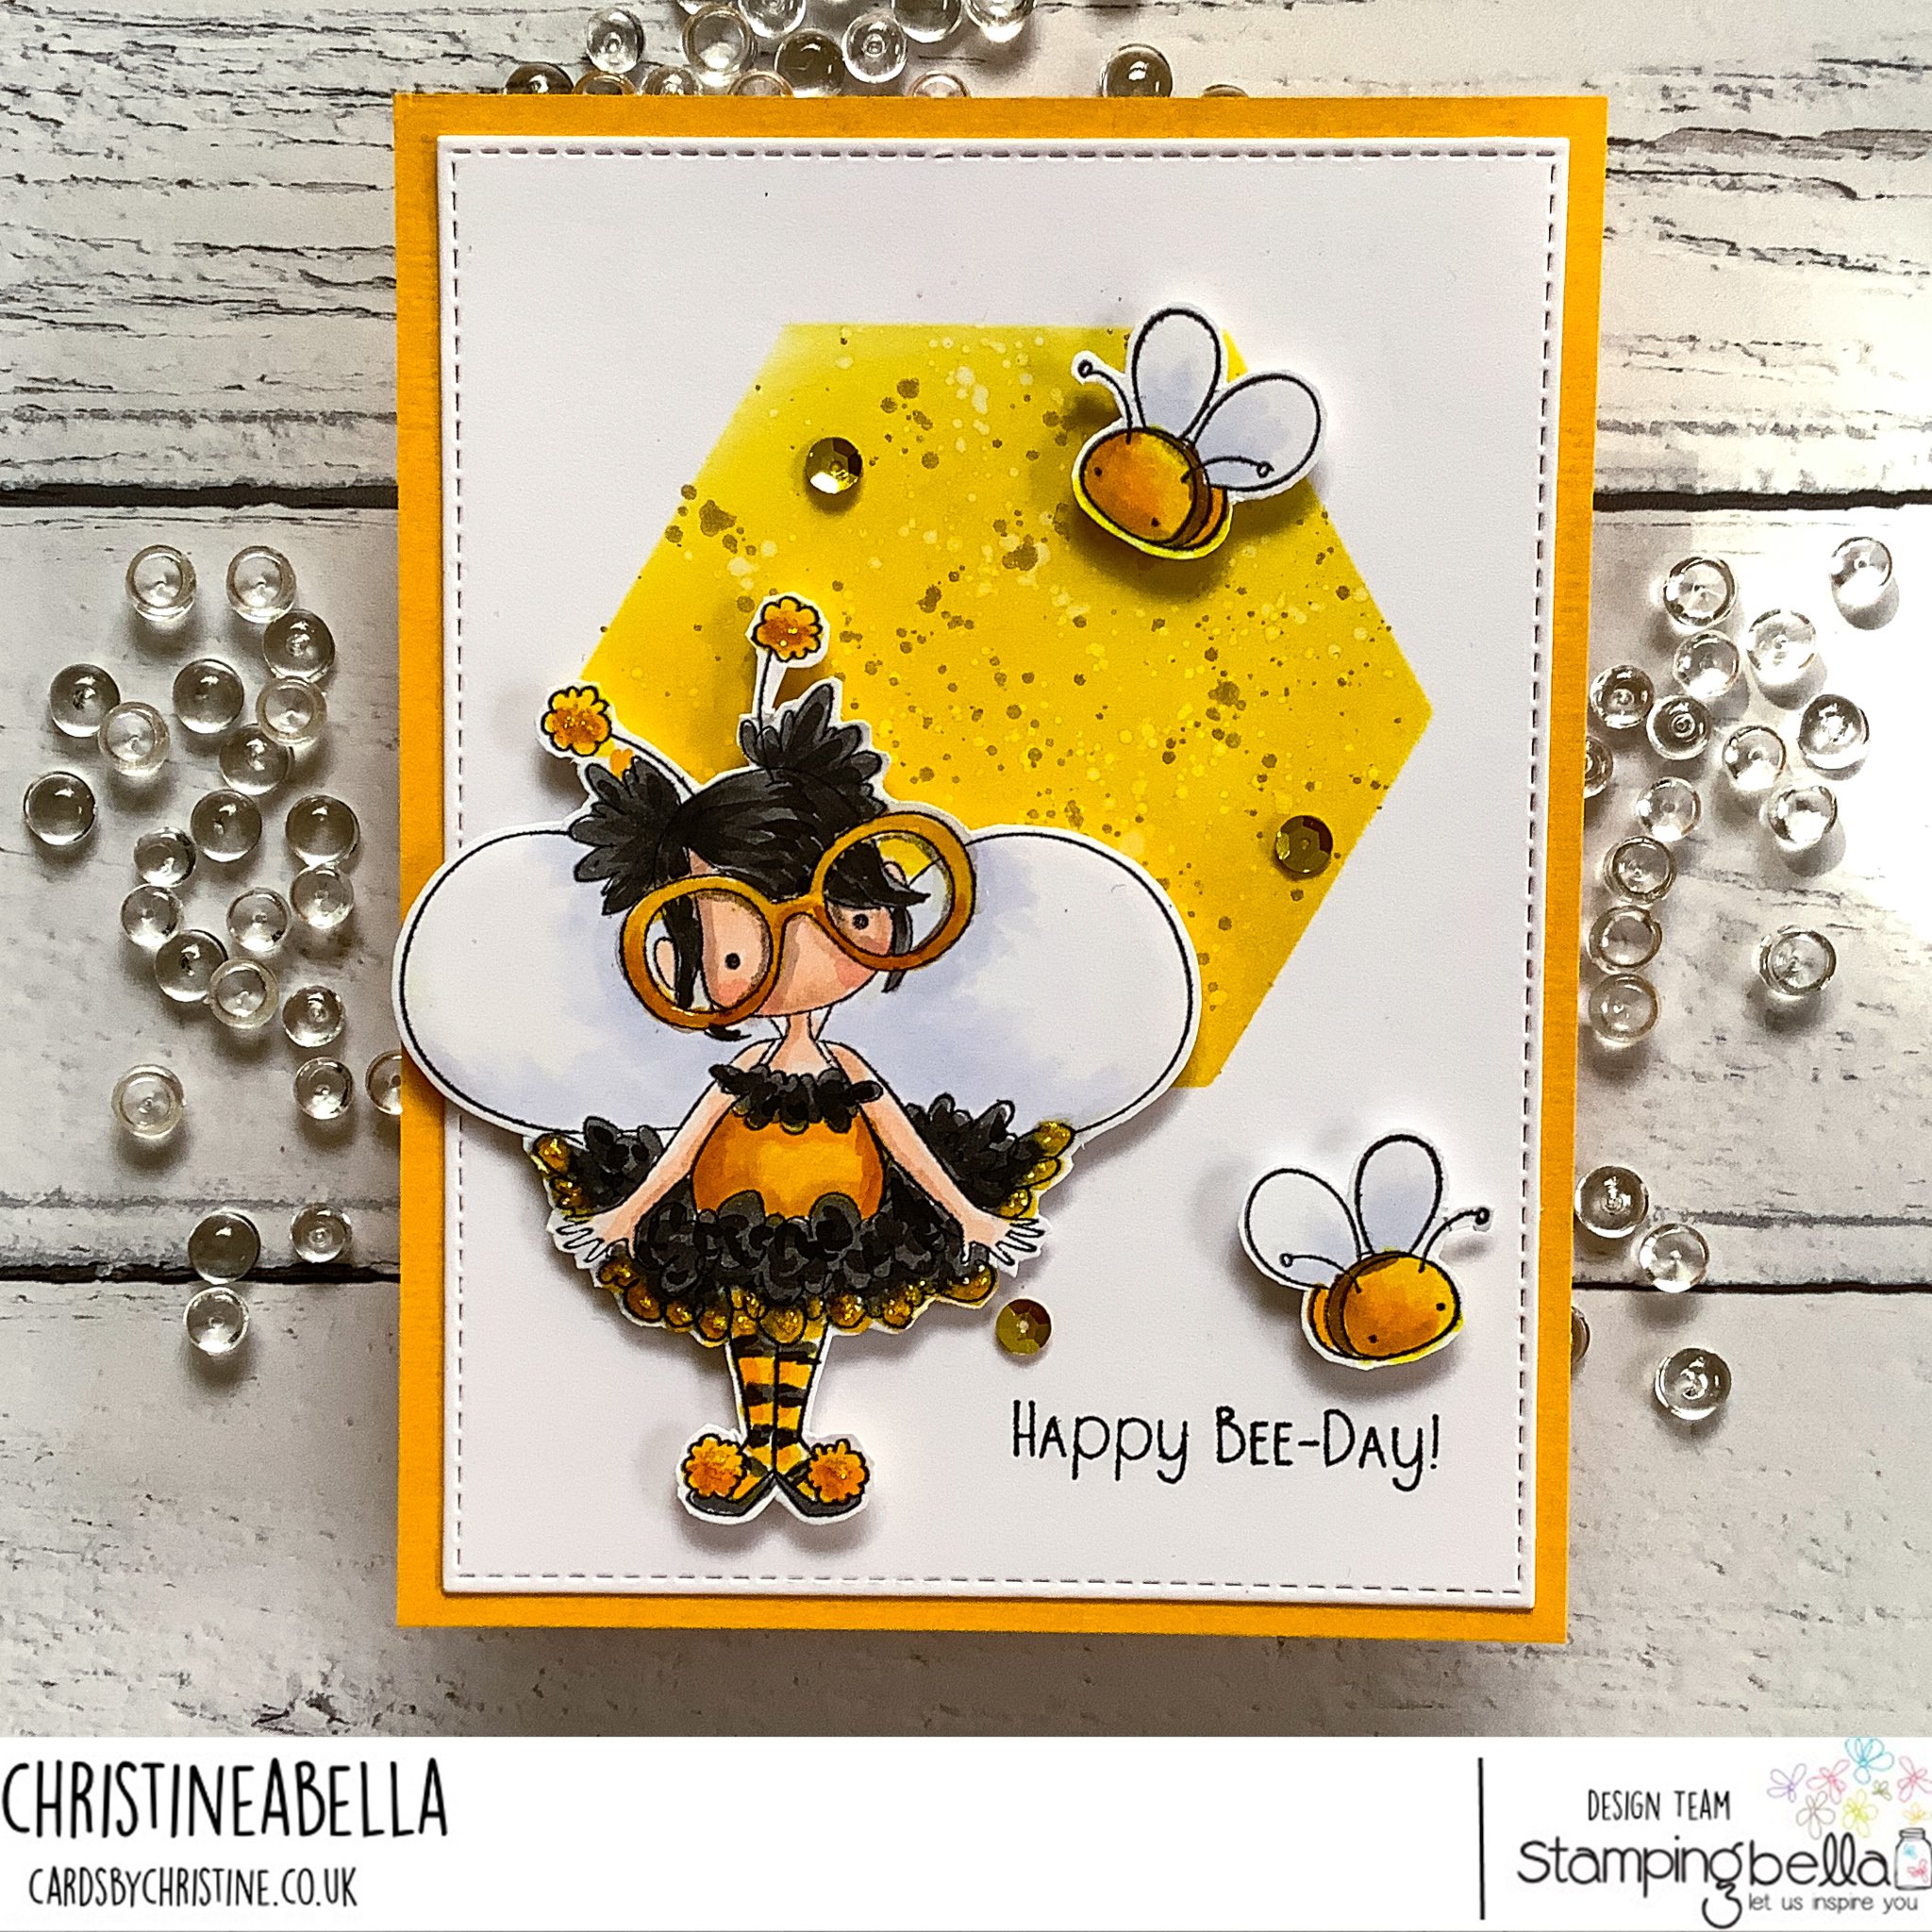 www.stampingbella.com  Rubber stamp used : tiny townie busy bee CARD BY CHRISTINE LEVISON